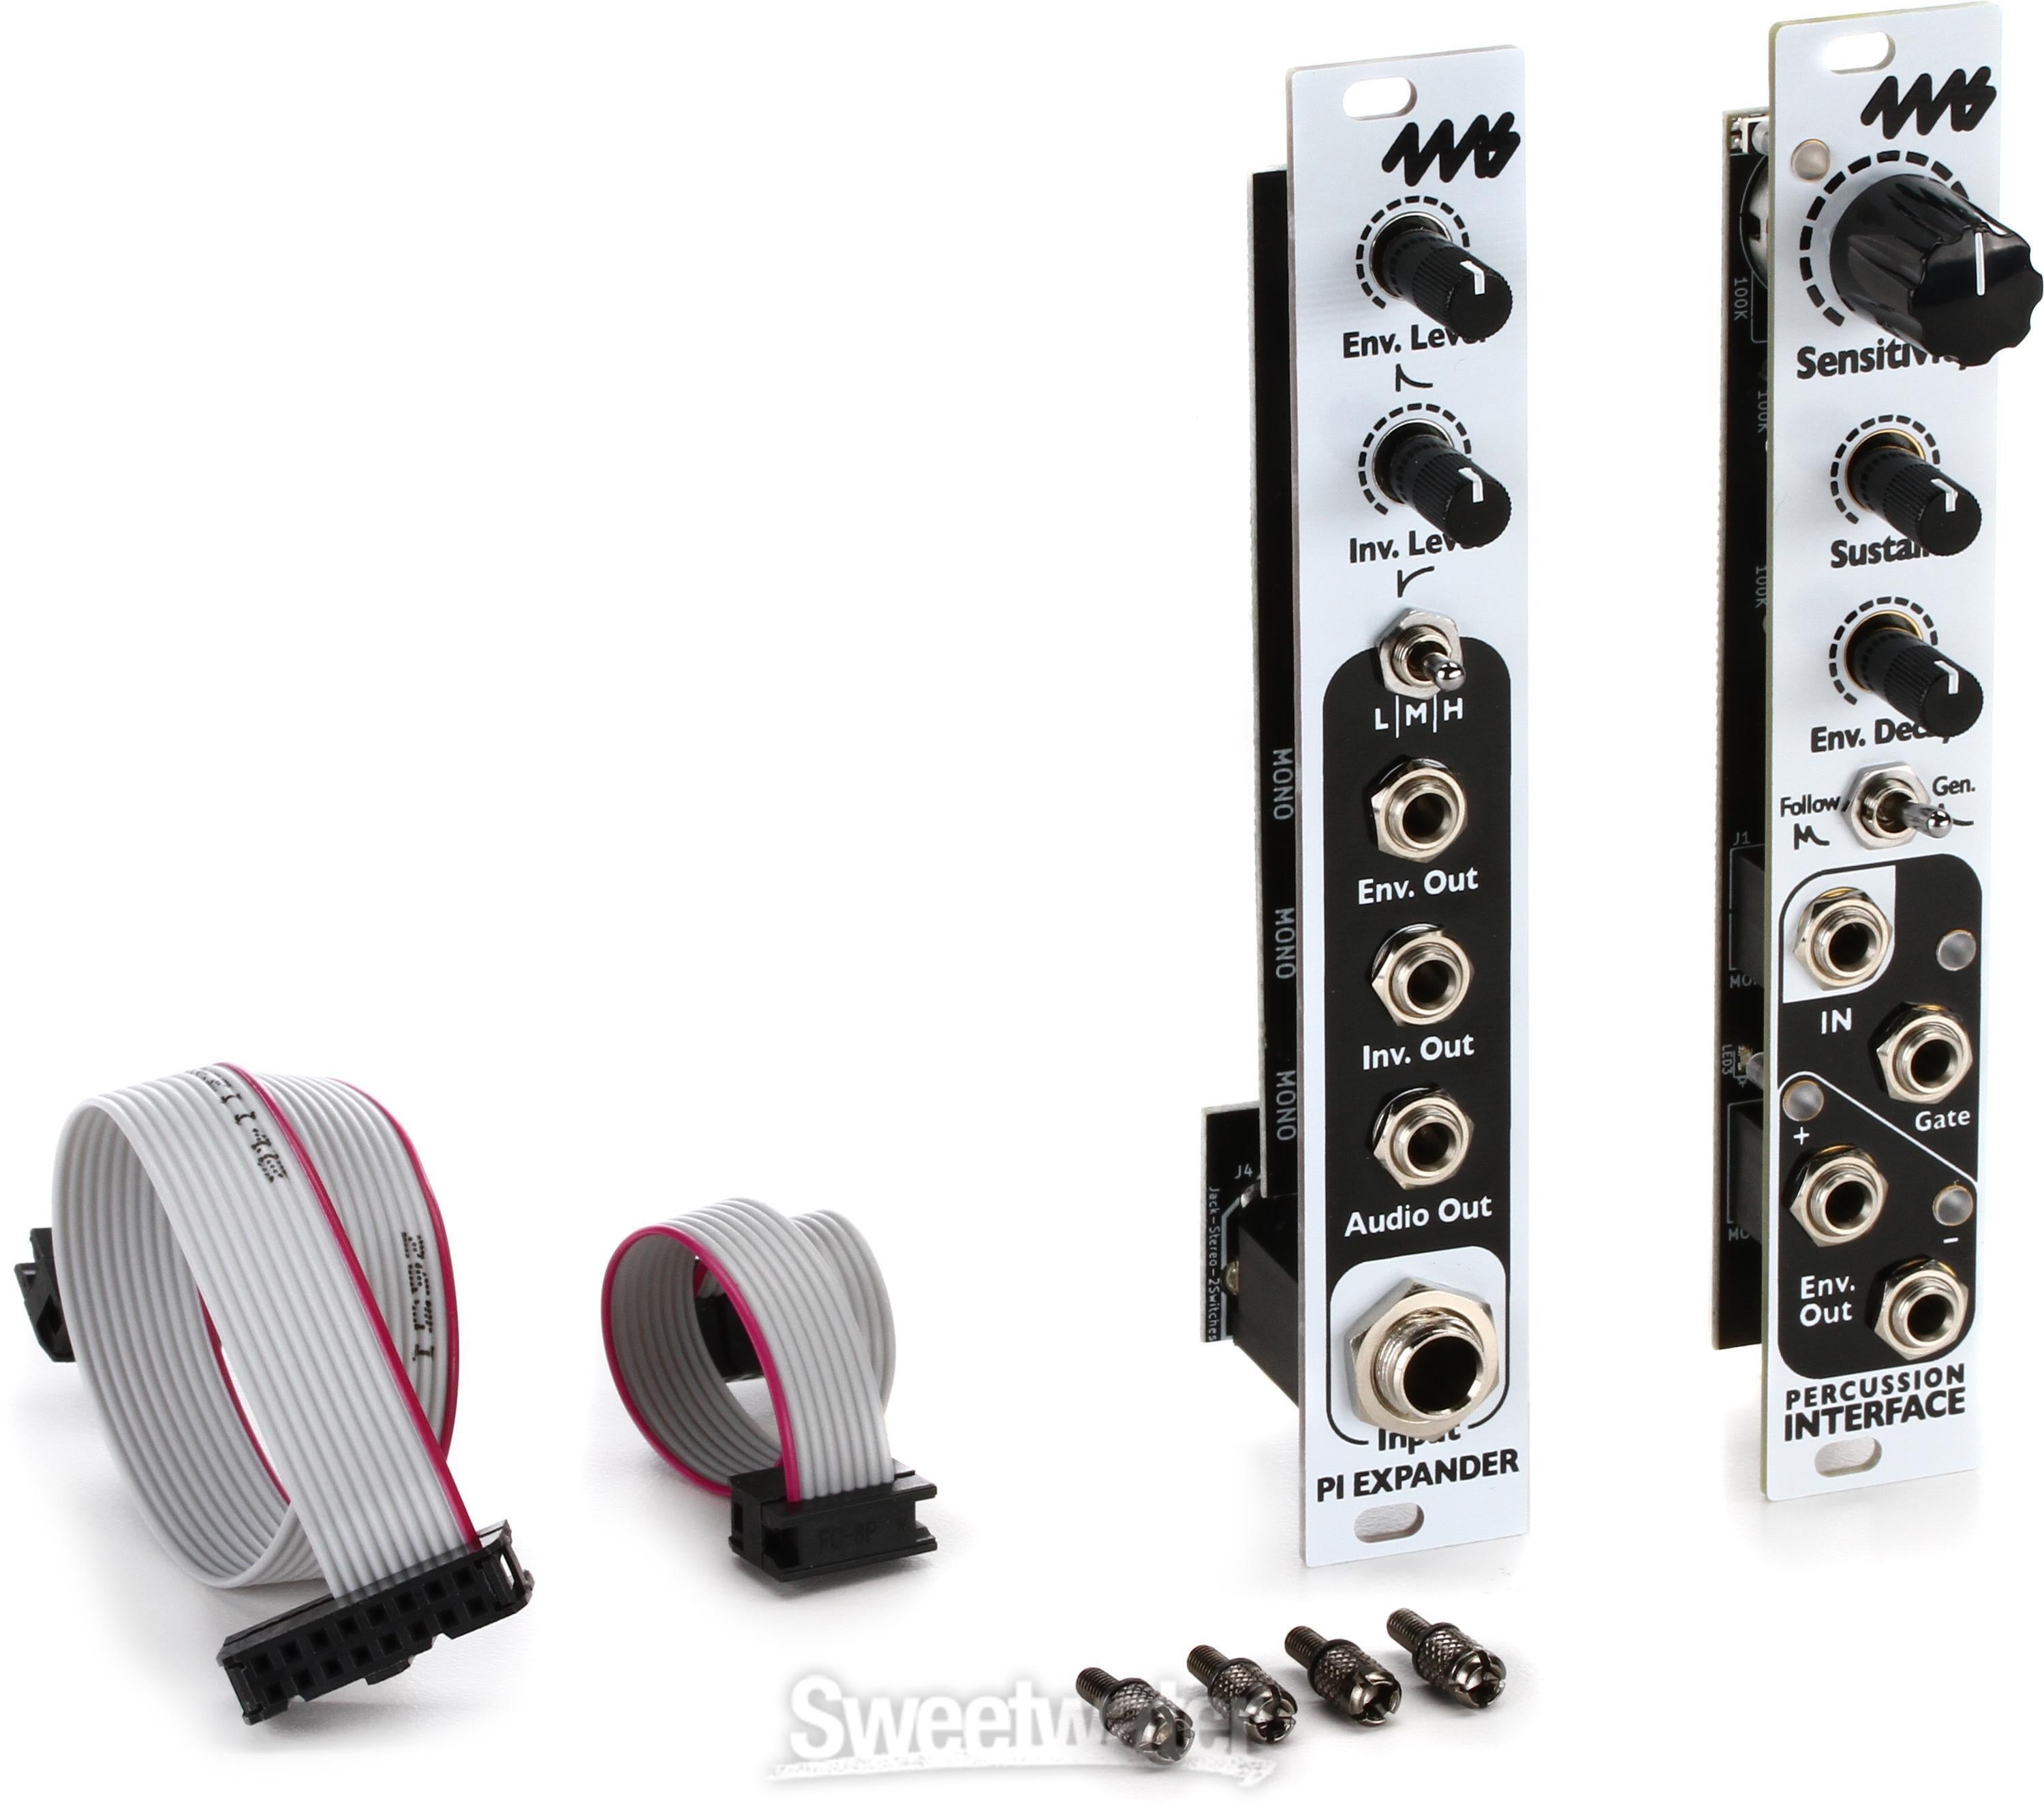 4ms Percussion Interface and PI Expander Eurorack Modules | Sweetwater